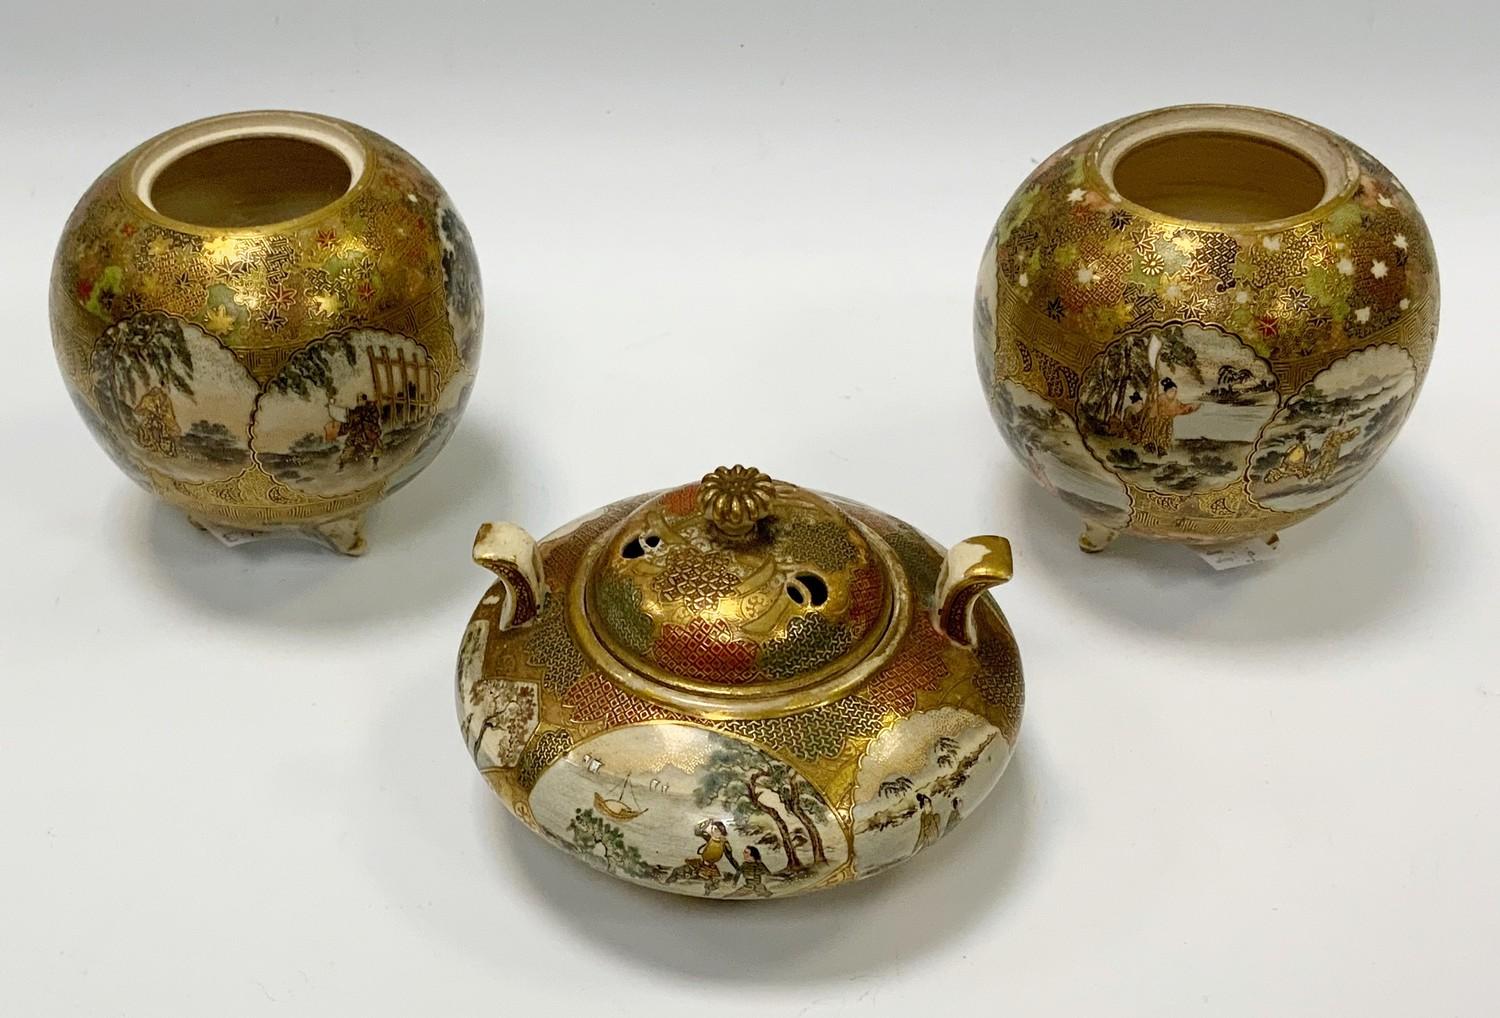 A pair of Japanese Satsuma pottery globular vases, each decorated with traditional figure panels